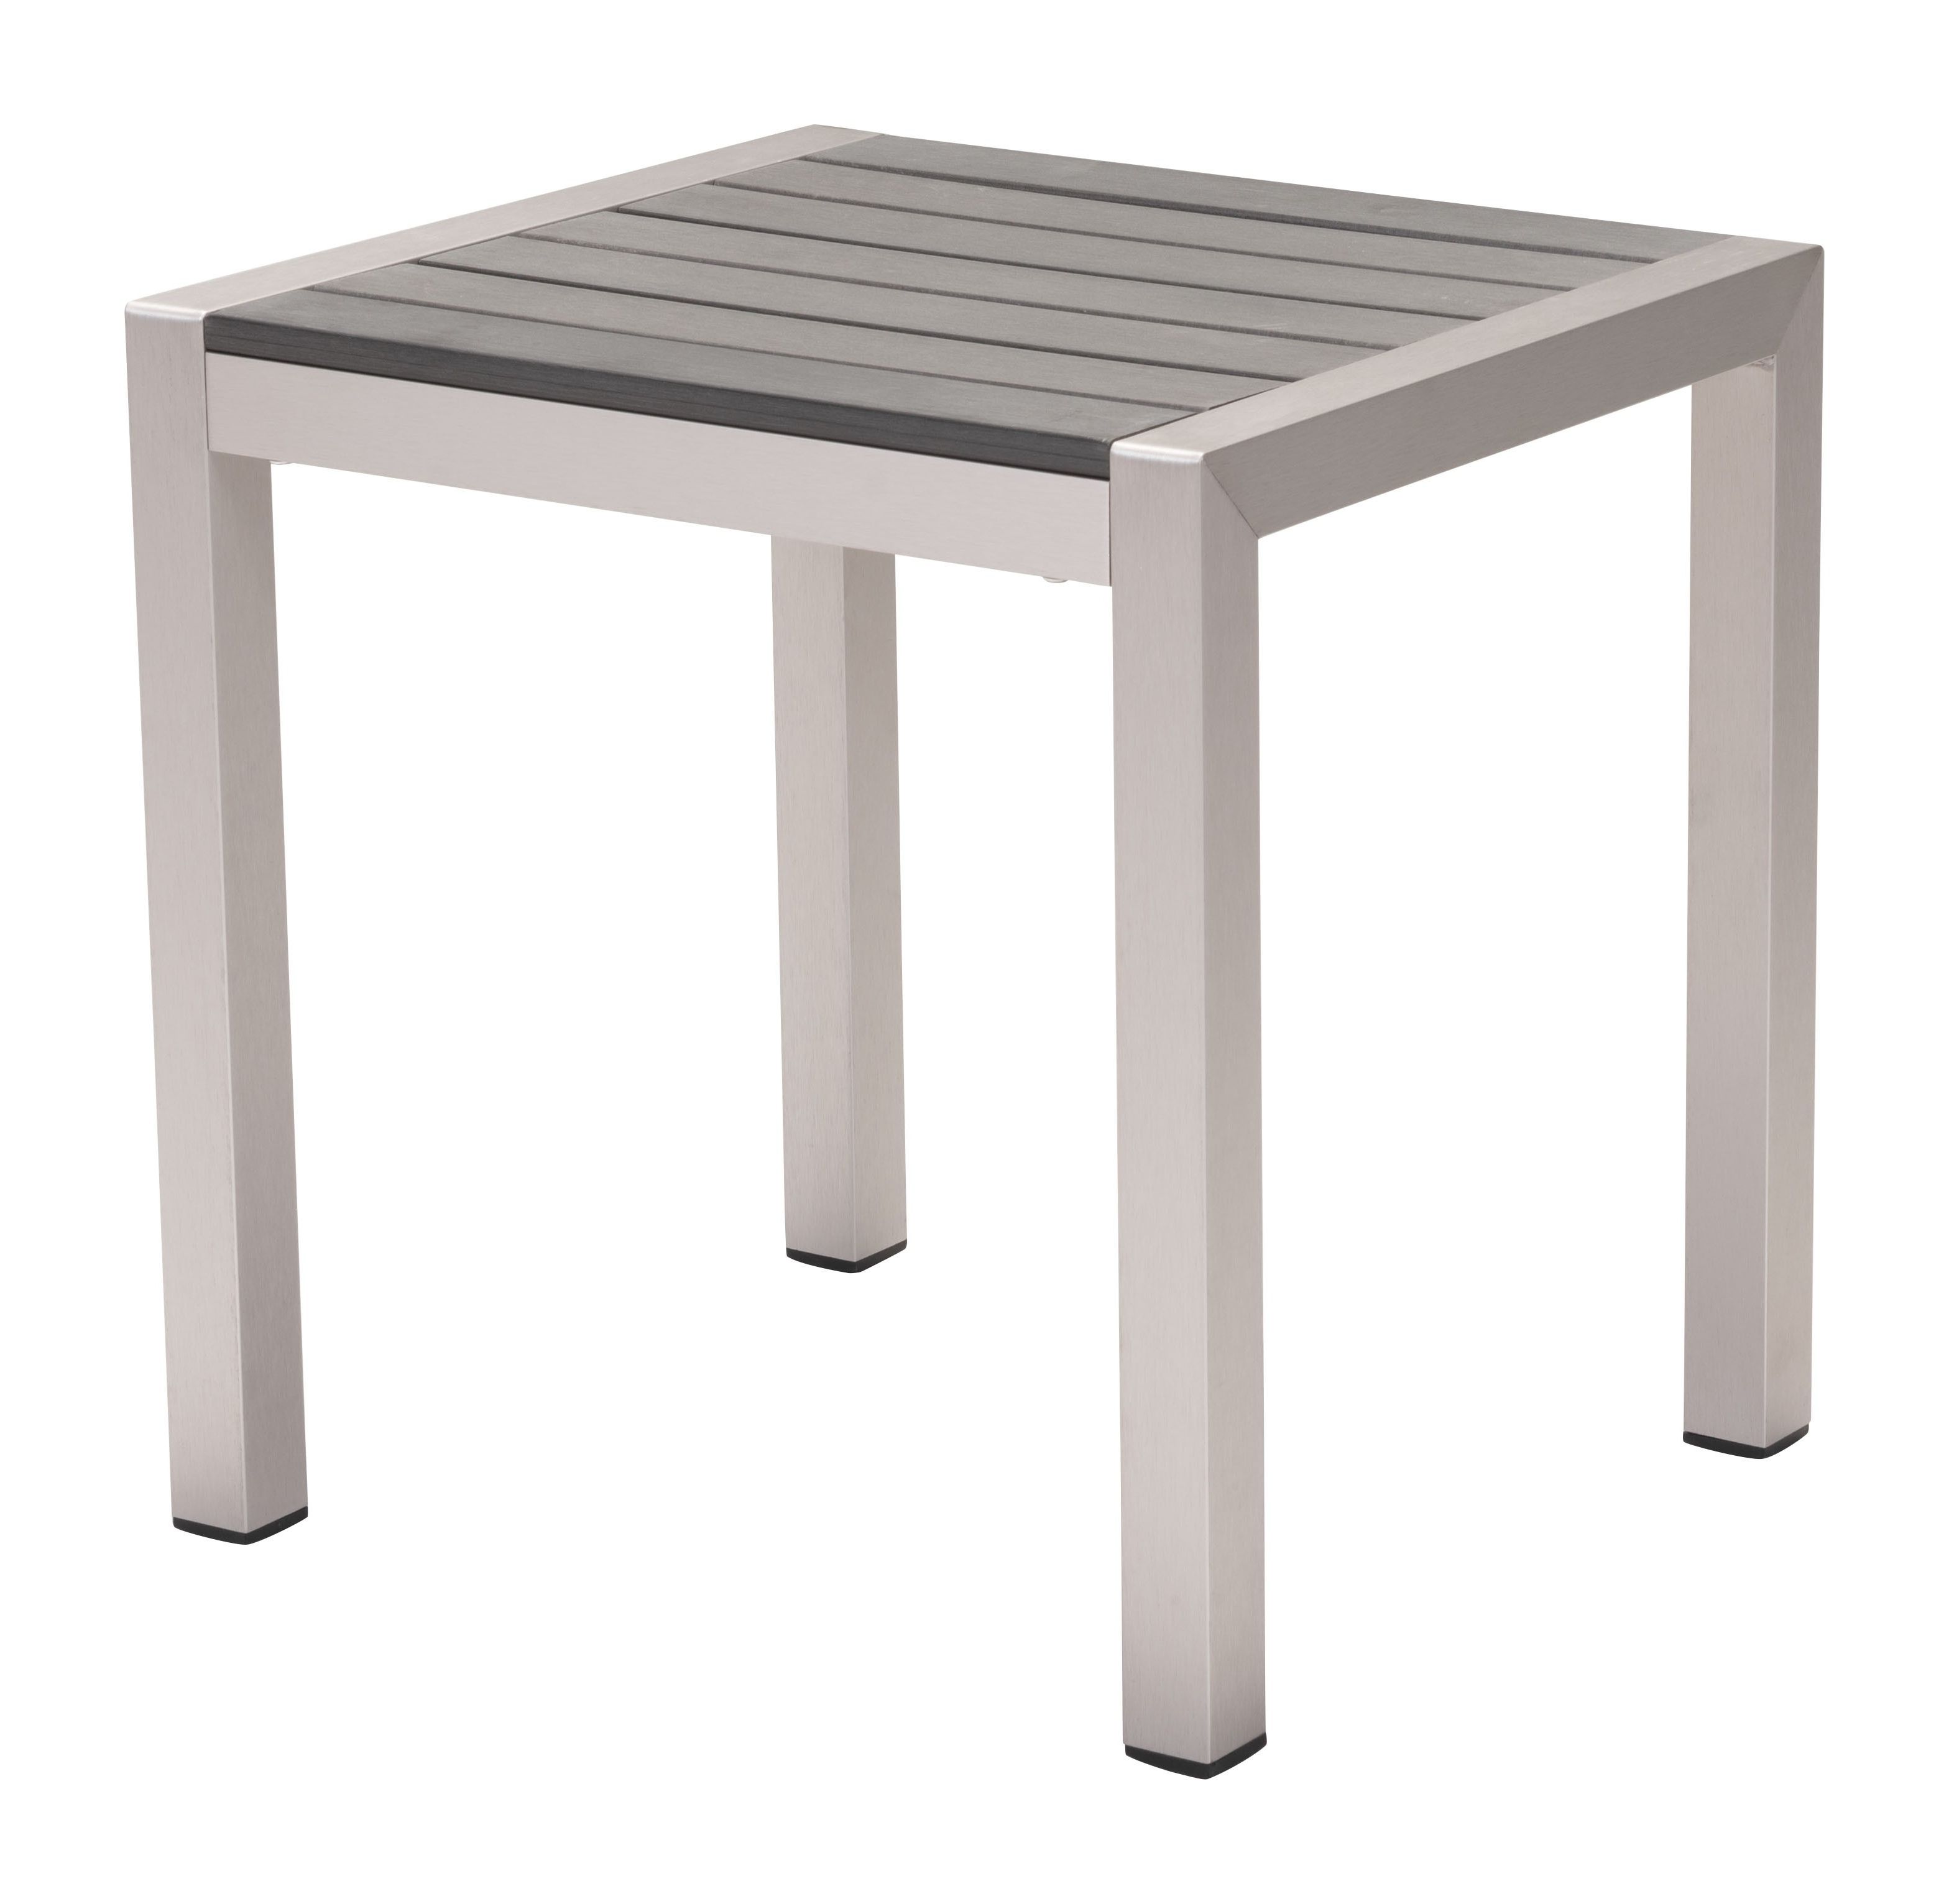 Widely Used Carly Indoor/outdoor Side Table, Gray Intended For Carly Rectangle Dining Tables (View 13 of 25)